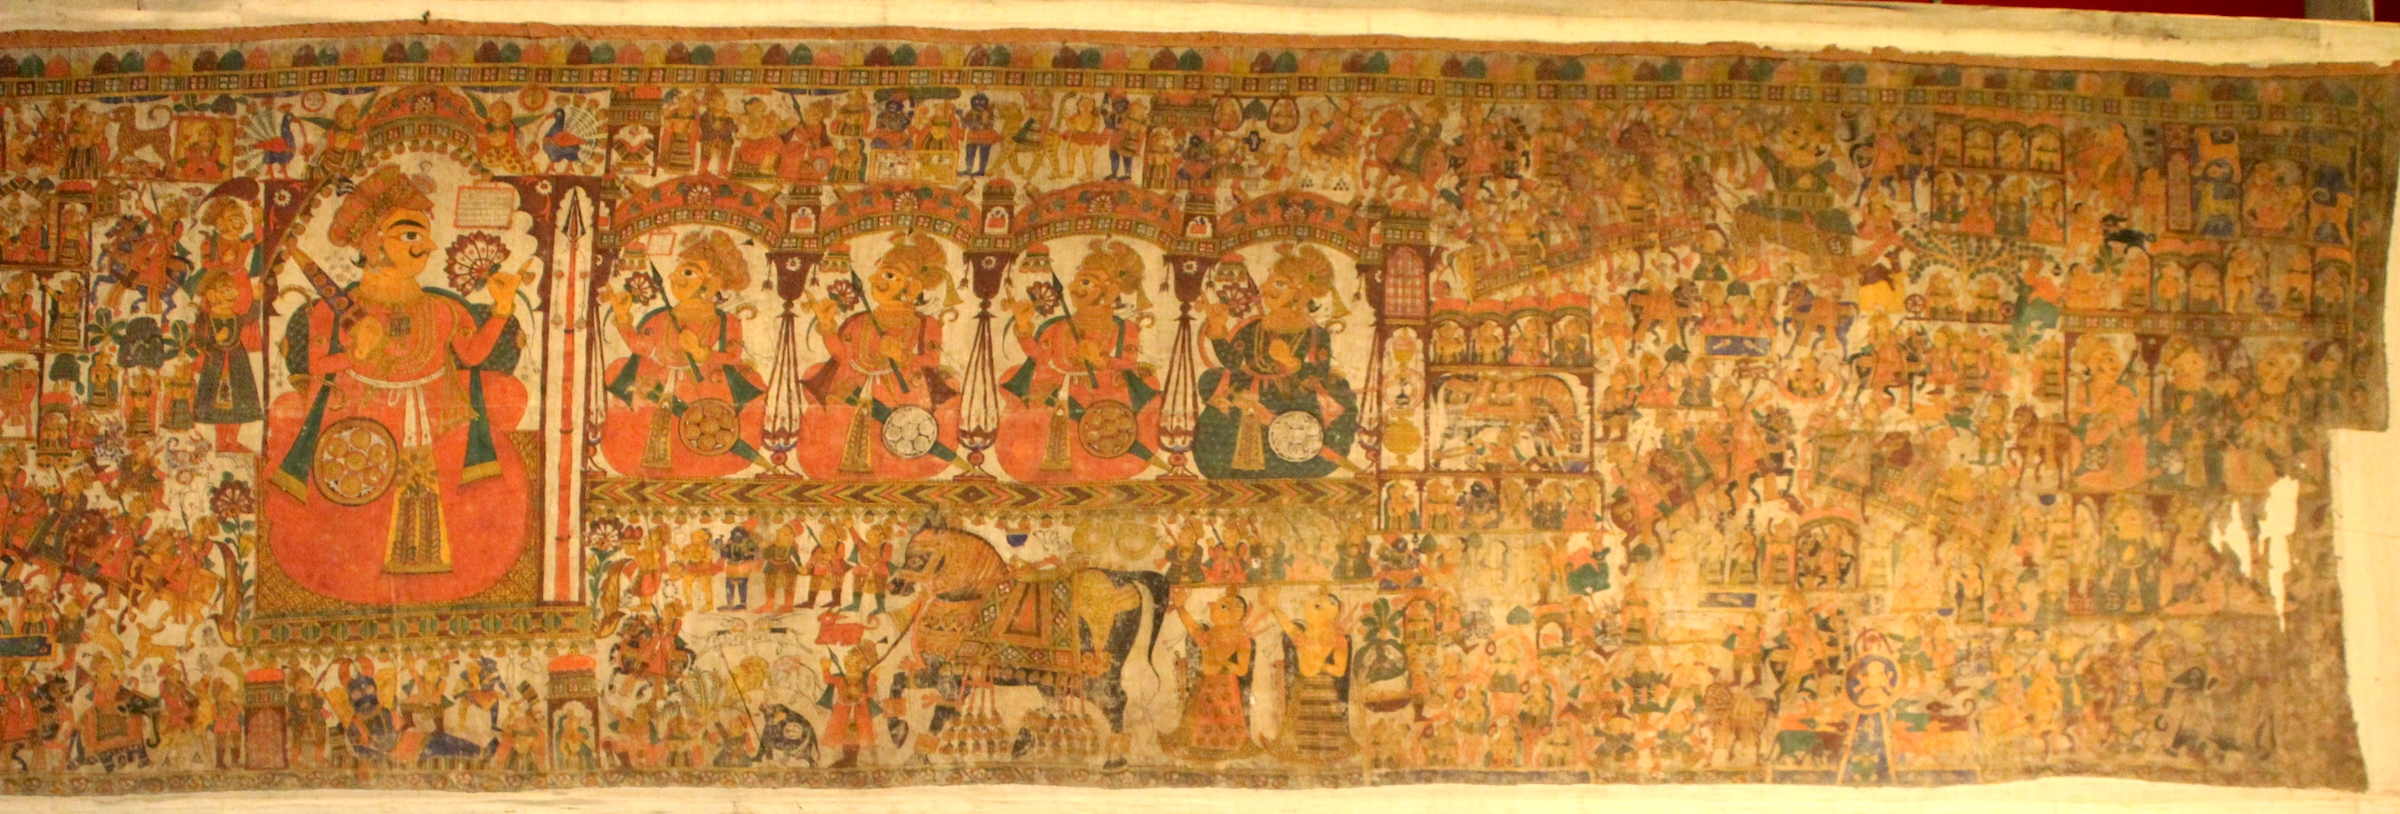 An image of a phad painting